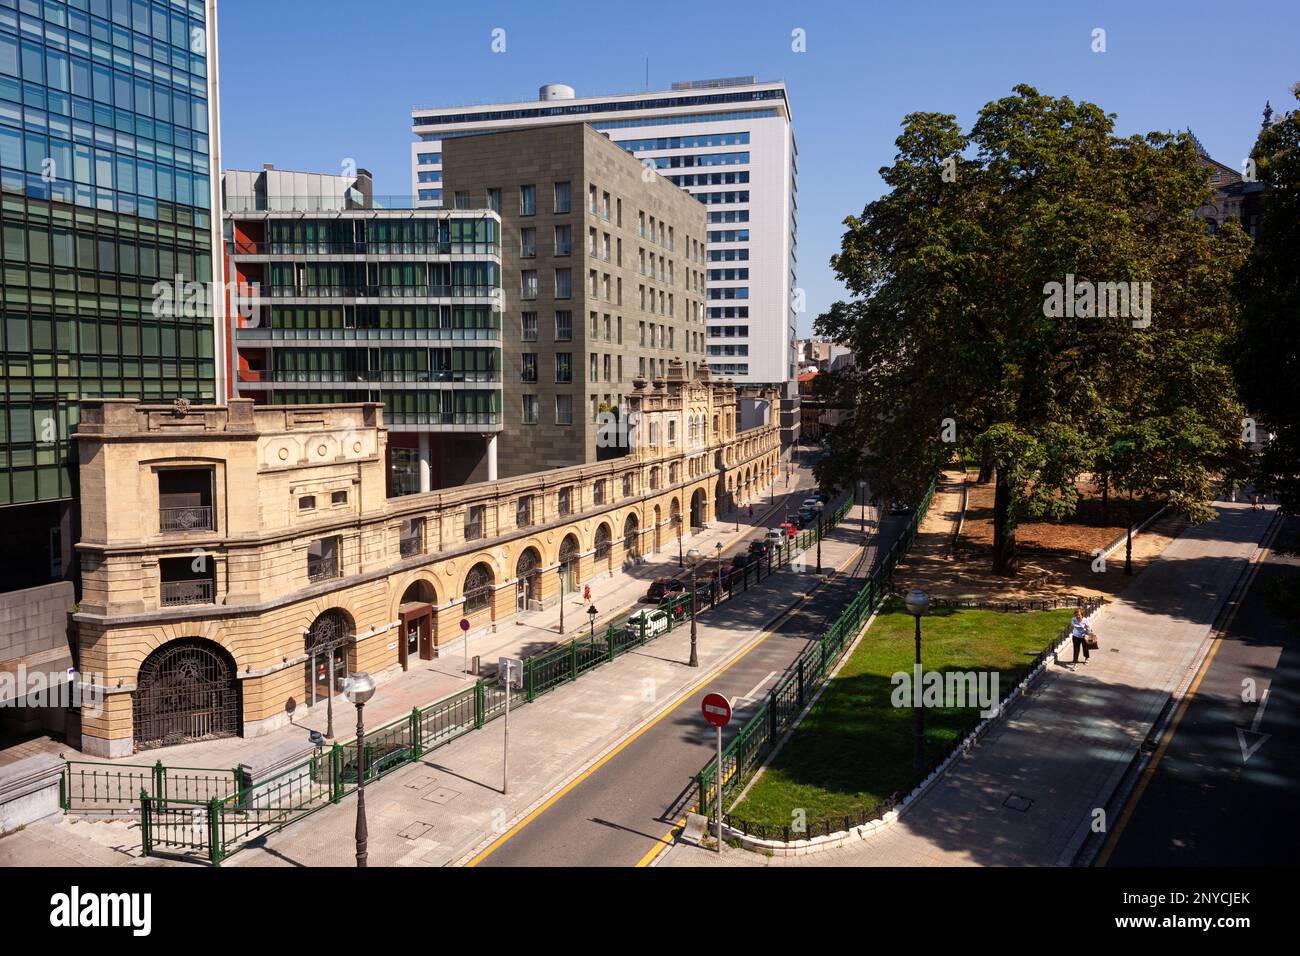 Bilbao, Spain - August 02, 2022: Uribitarte Street, with the facade of the old Franco deposit in the foreground, the Albia building in the background Stock Photo